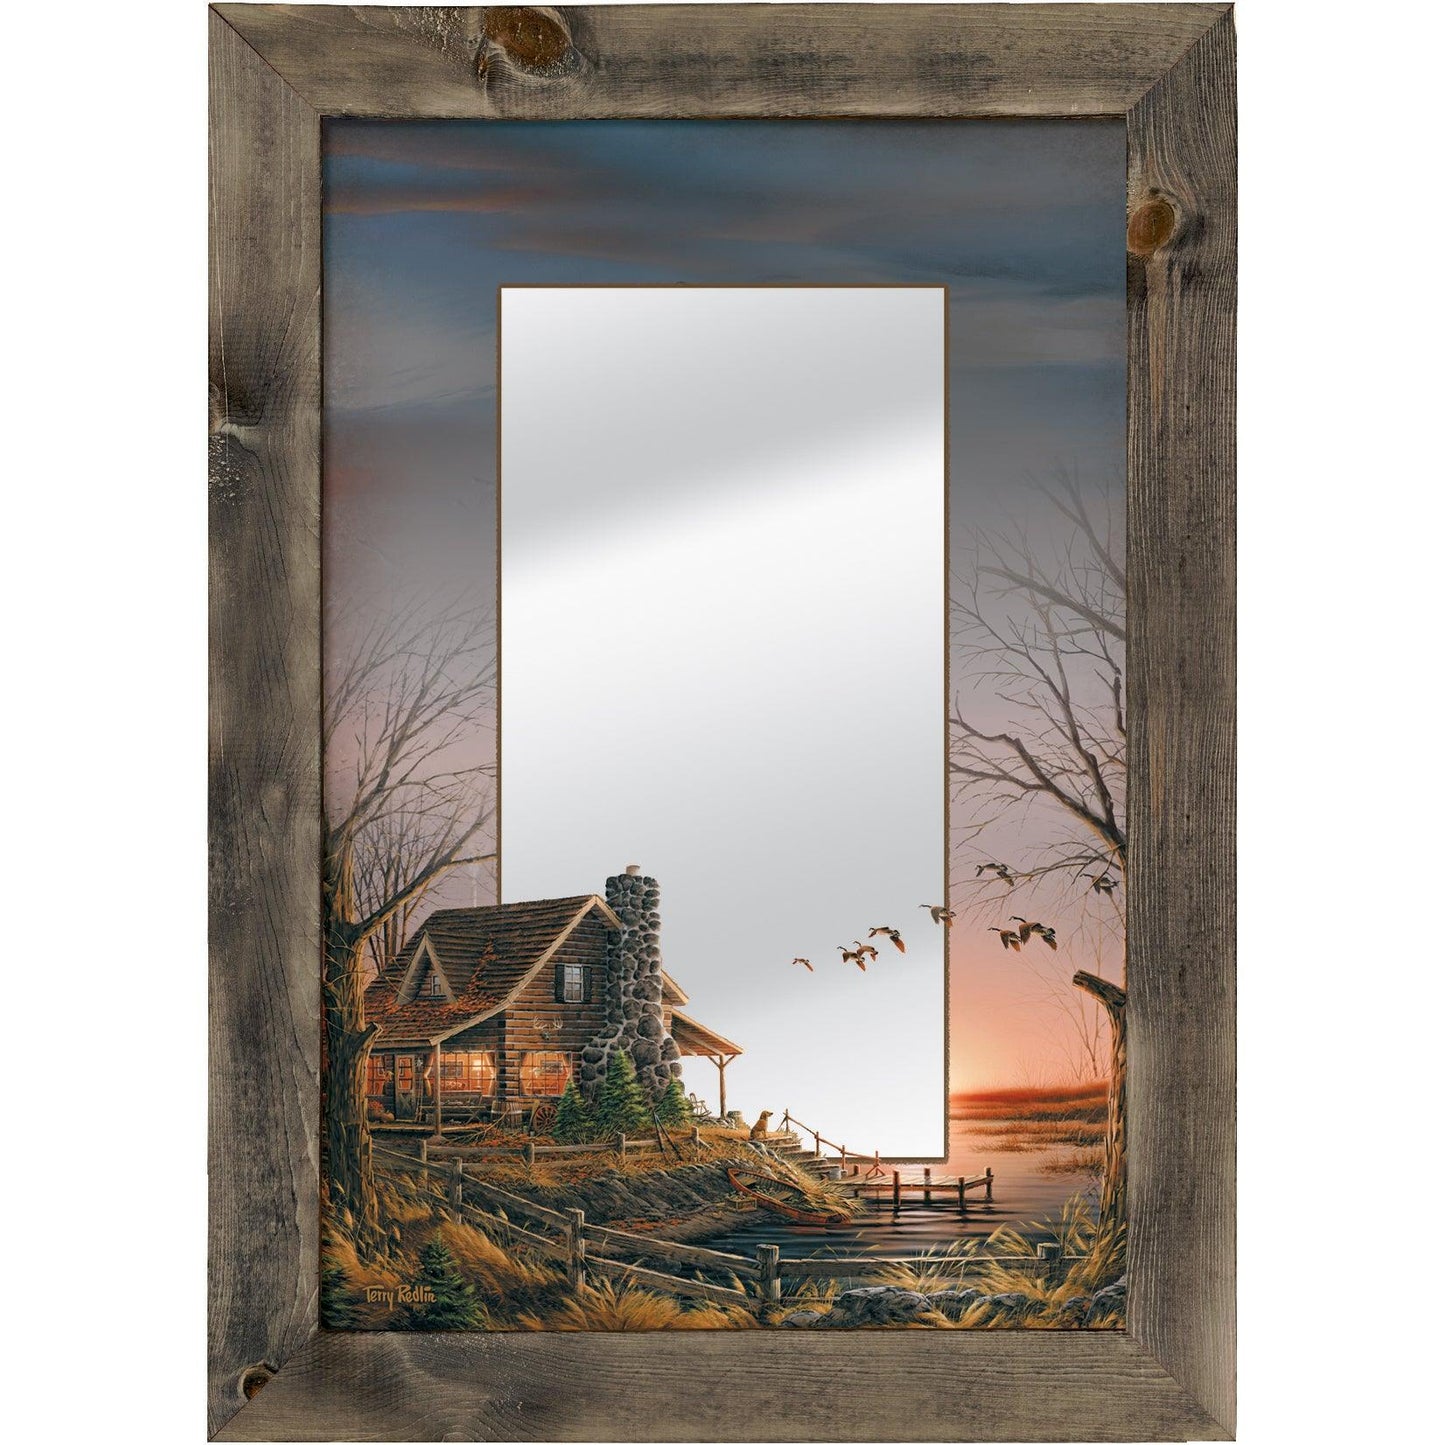 Comforts of Home Large Decorative Mirror - Wild Wings